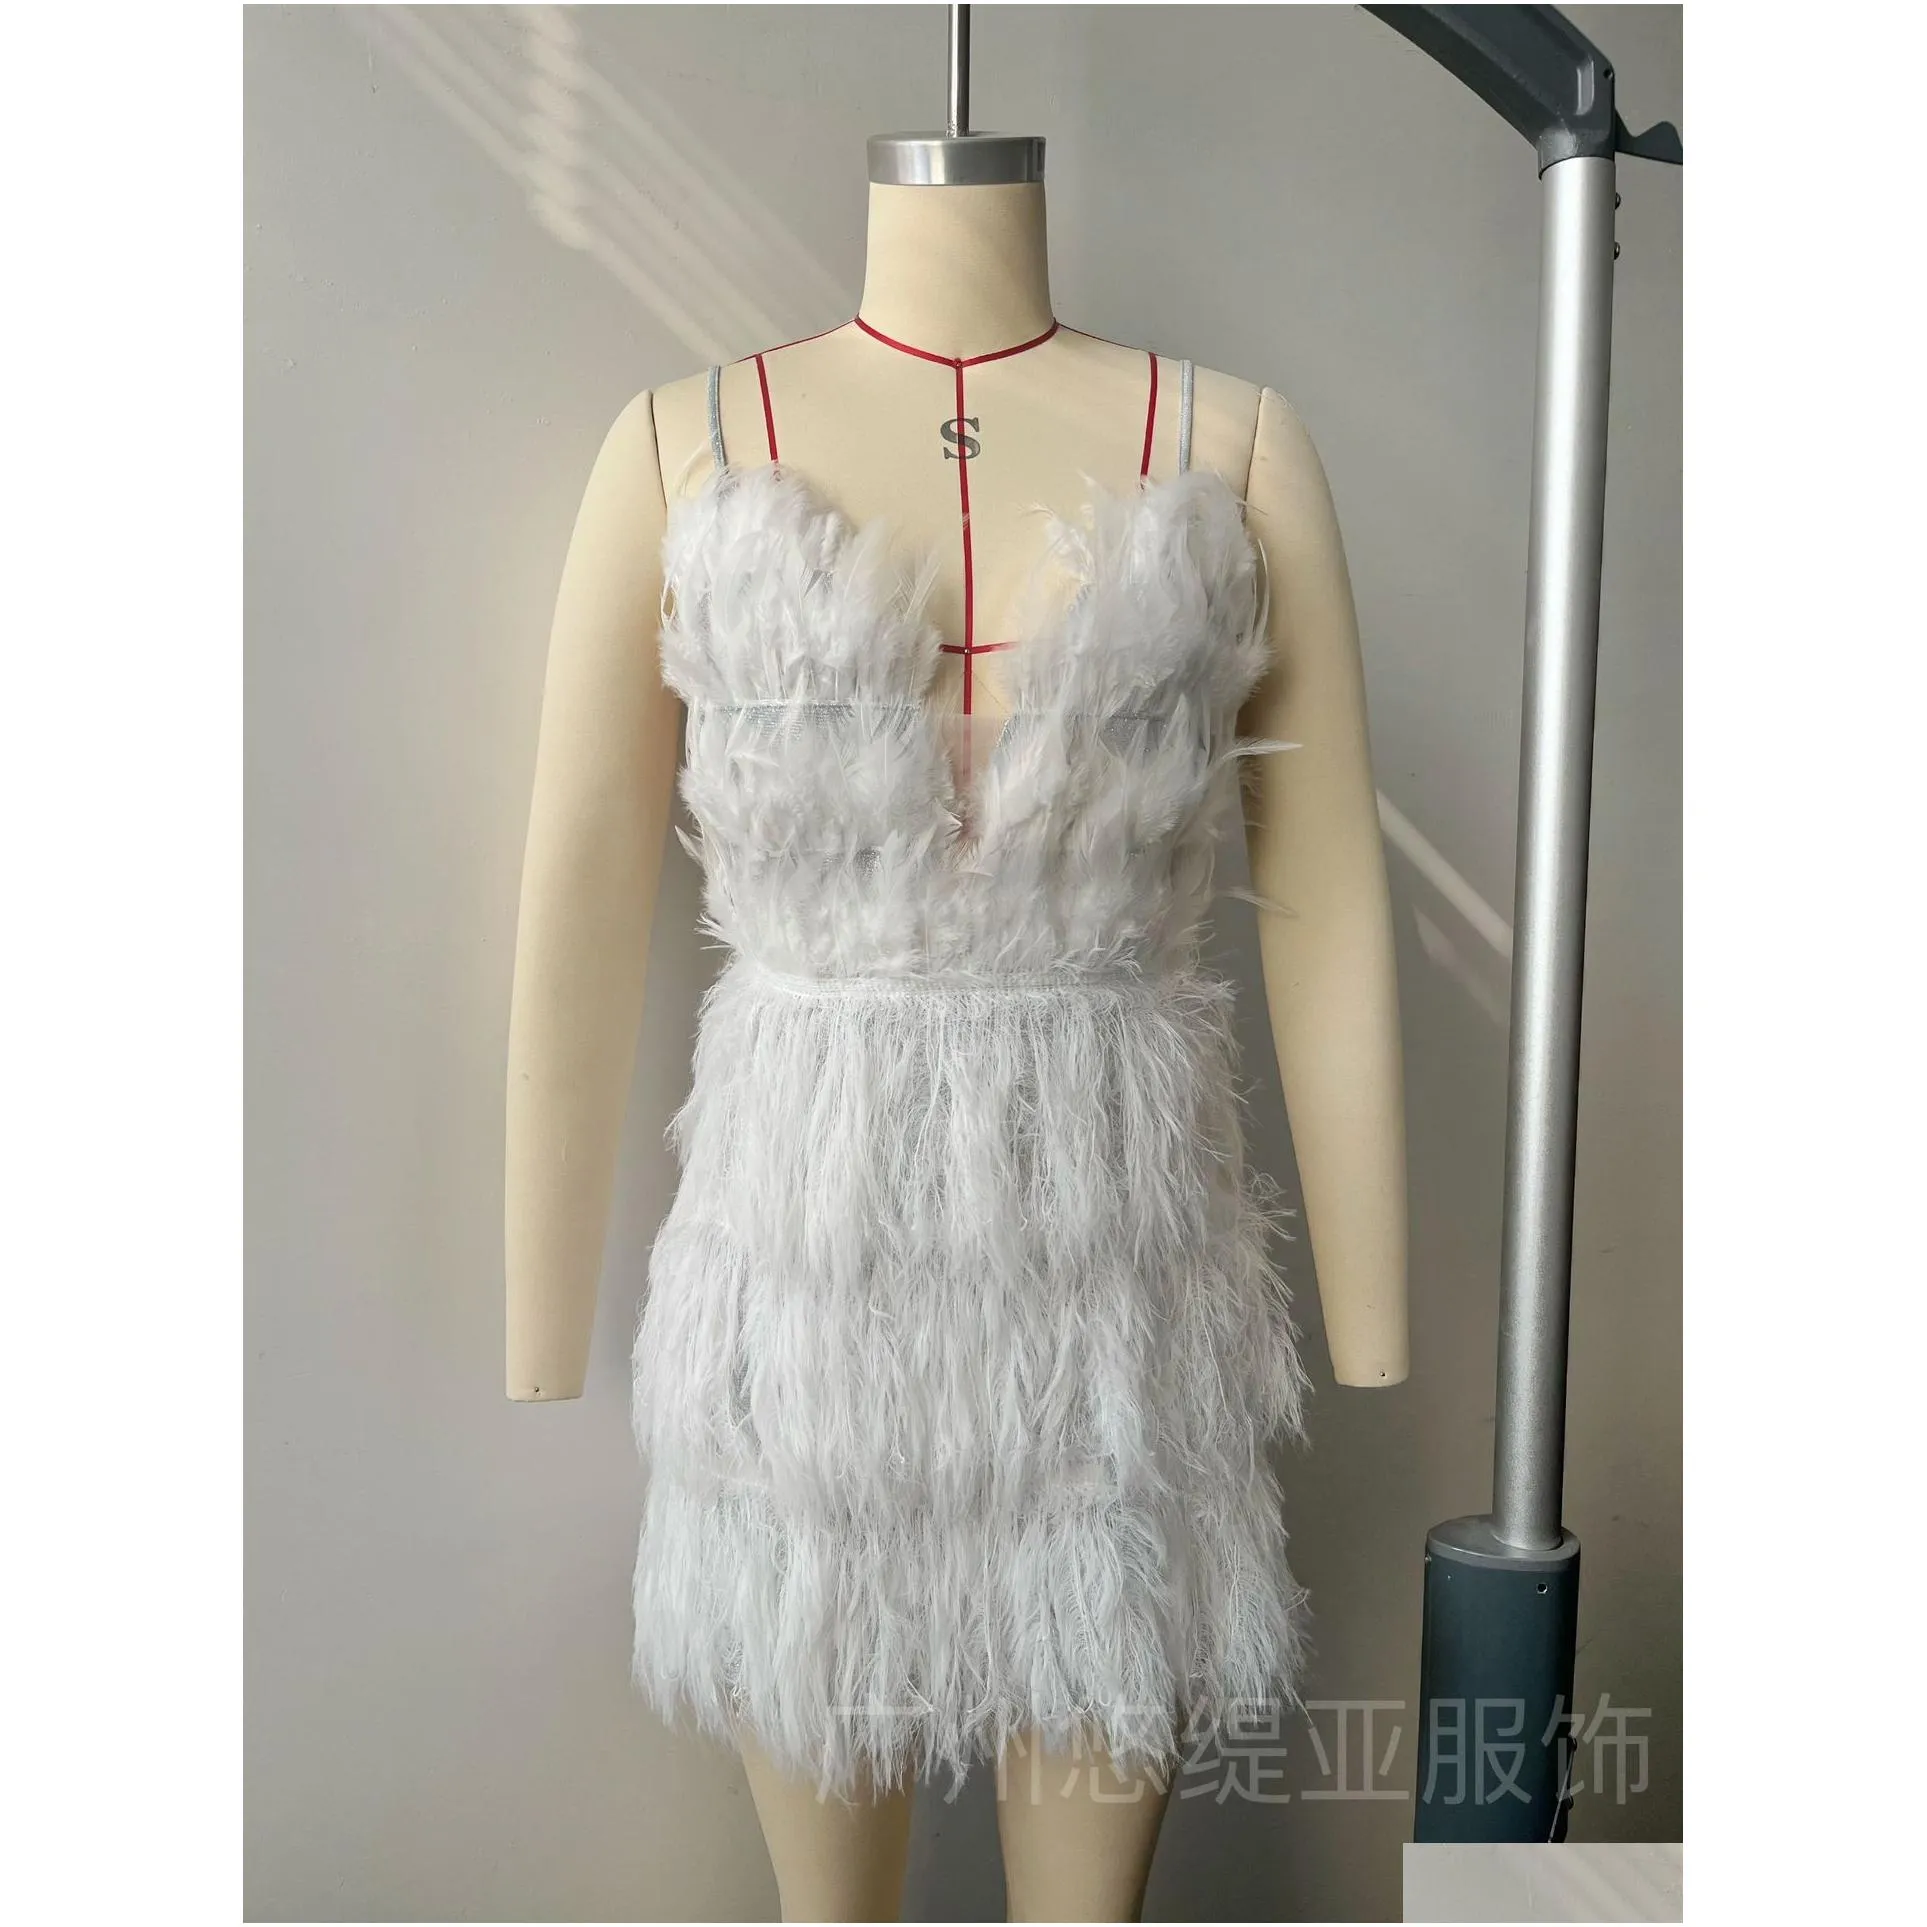 Autumn and Winter New European and American Women`s Fantastic Feather Dress, Open Back Party Dress, Waist Tight Chest, Deep V Feather Strap